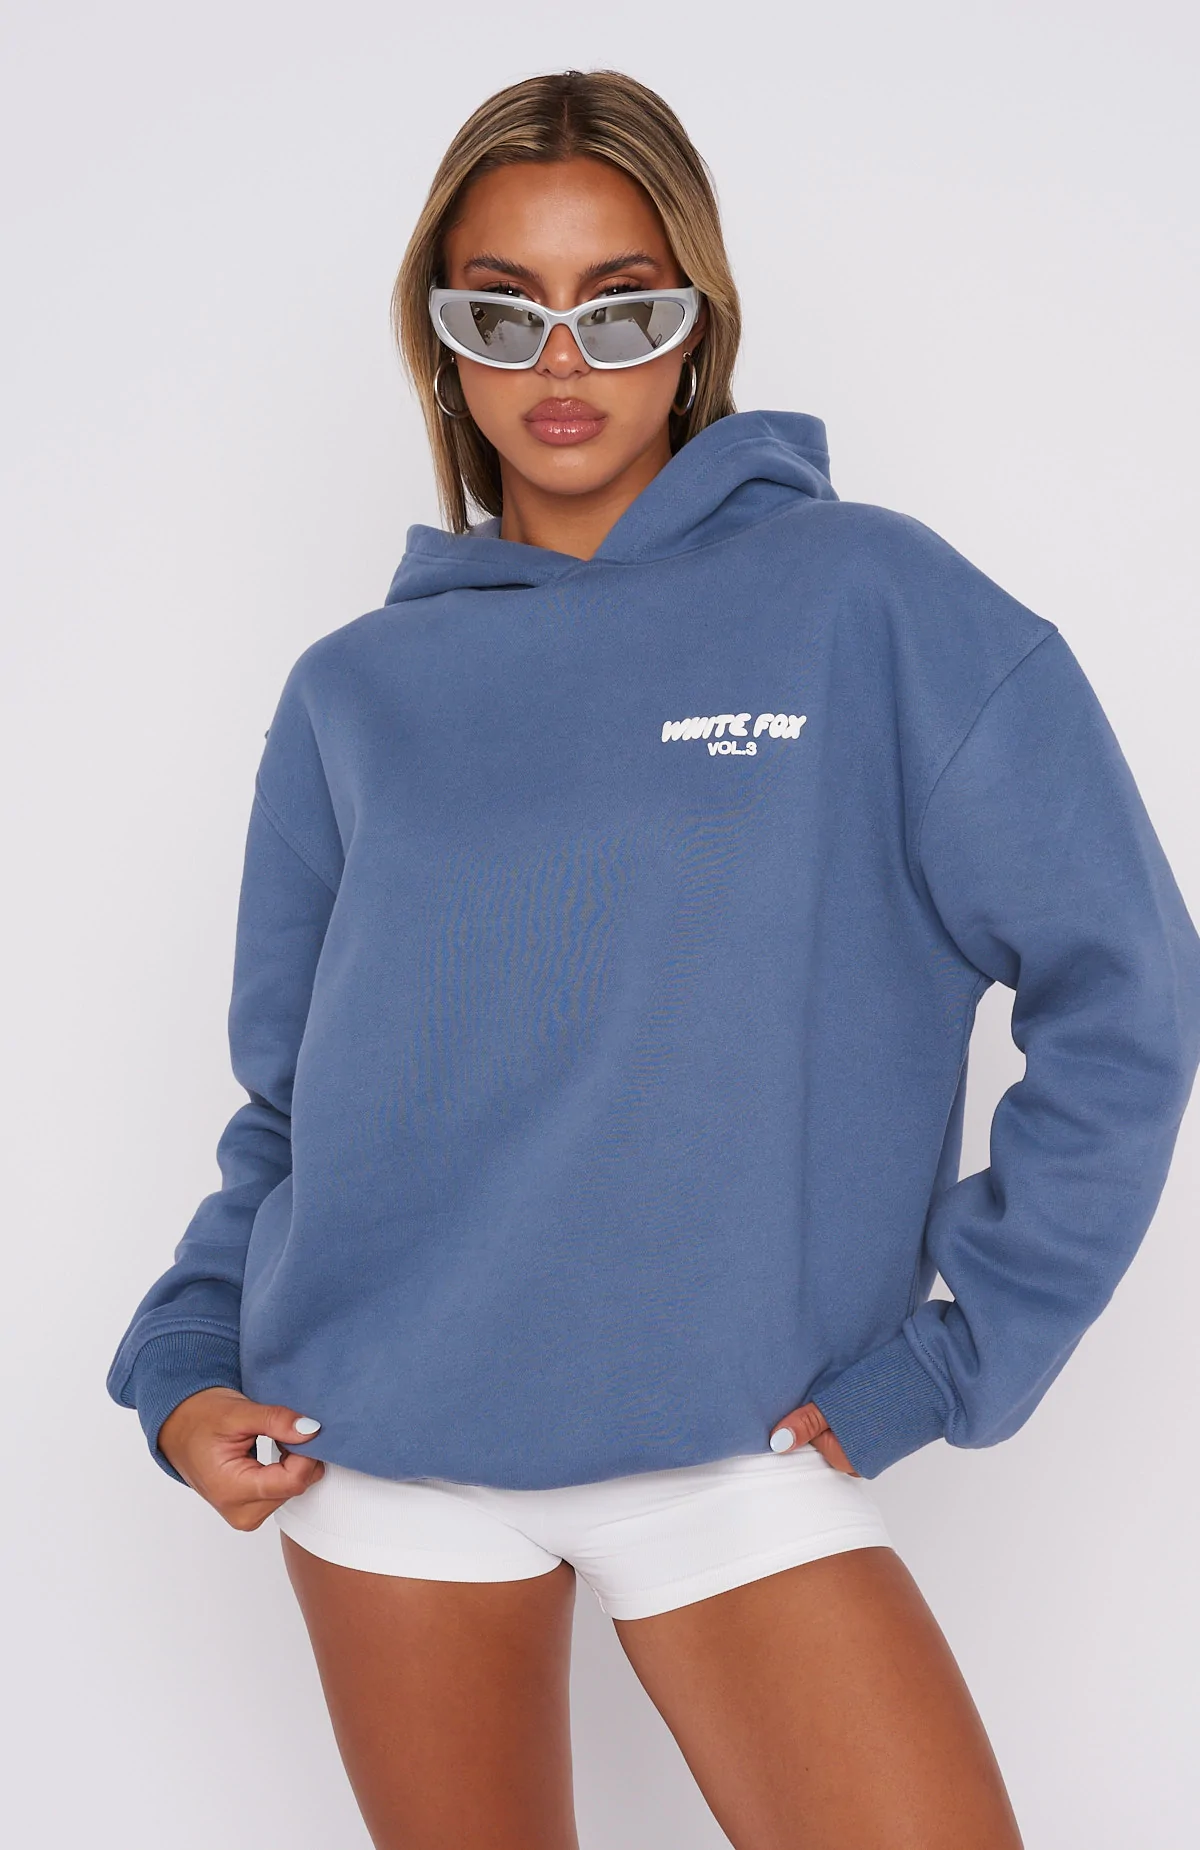 Add cute sweatshirts to your fashions for great looks